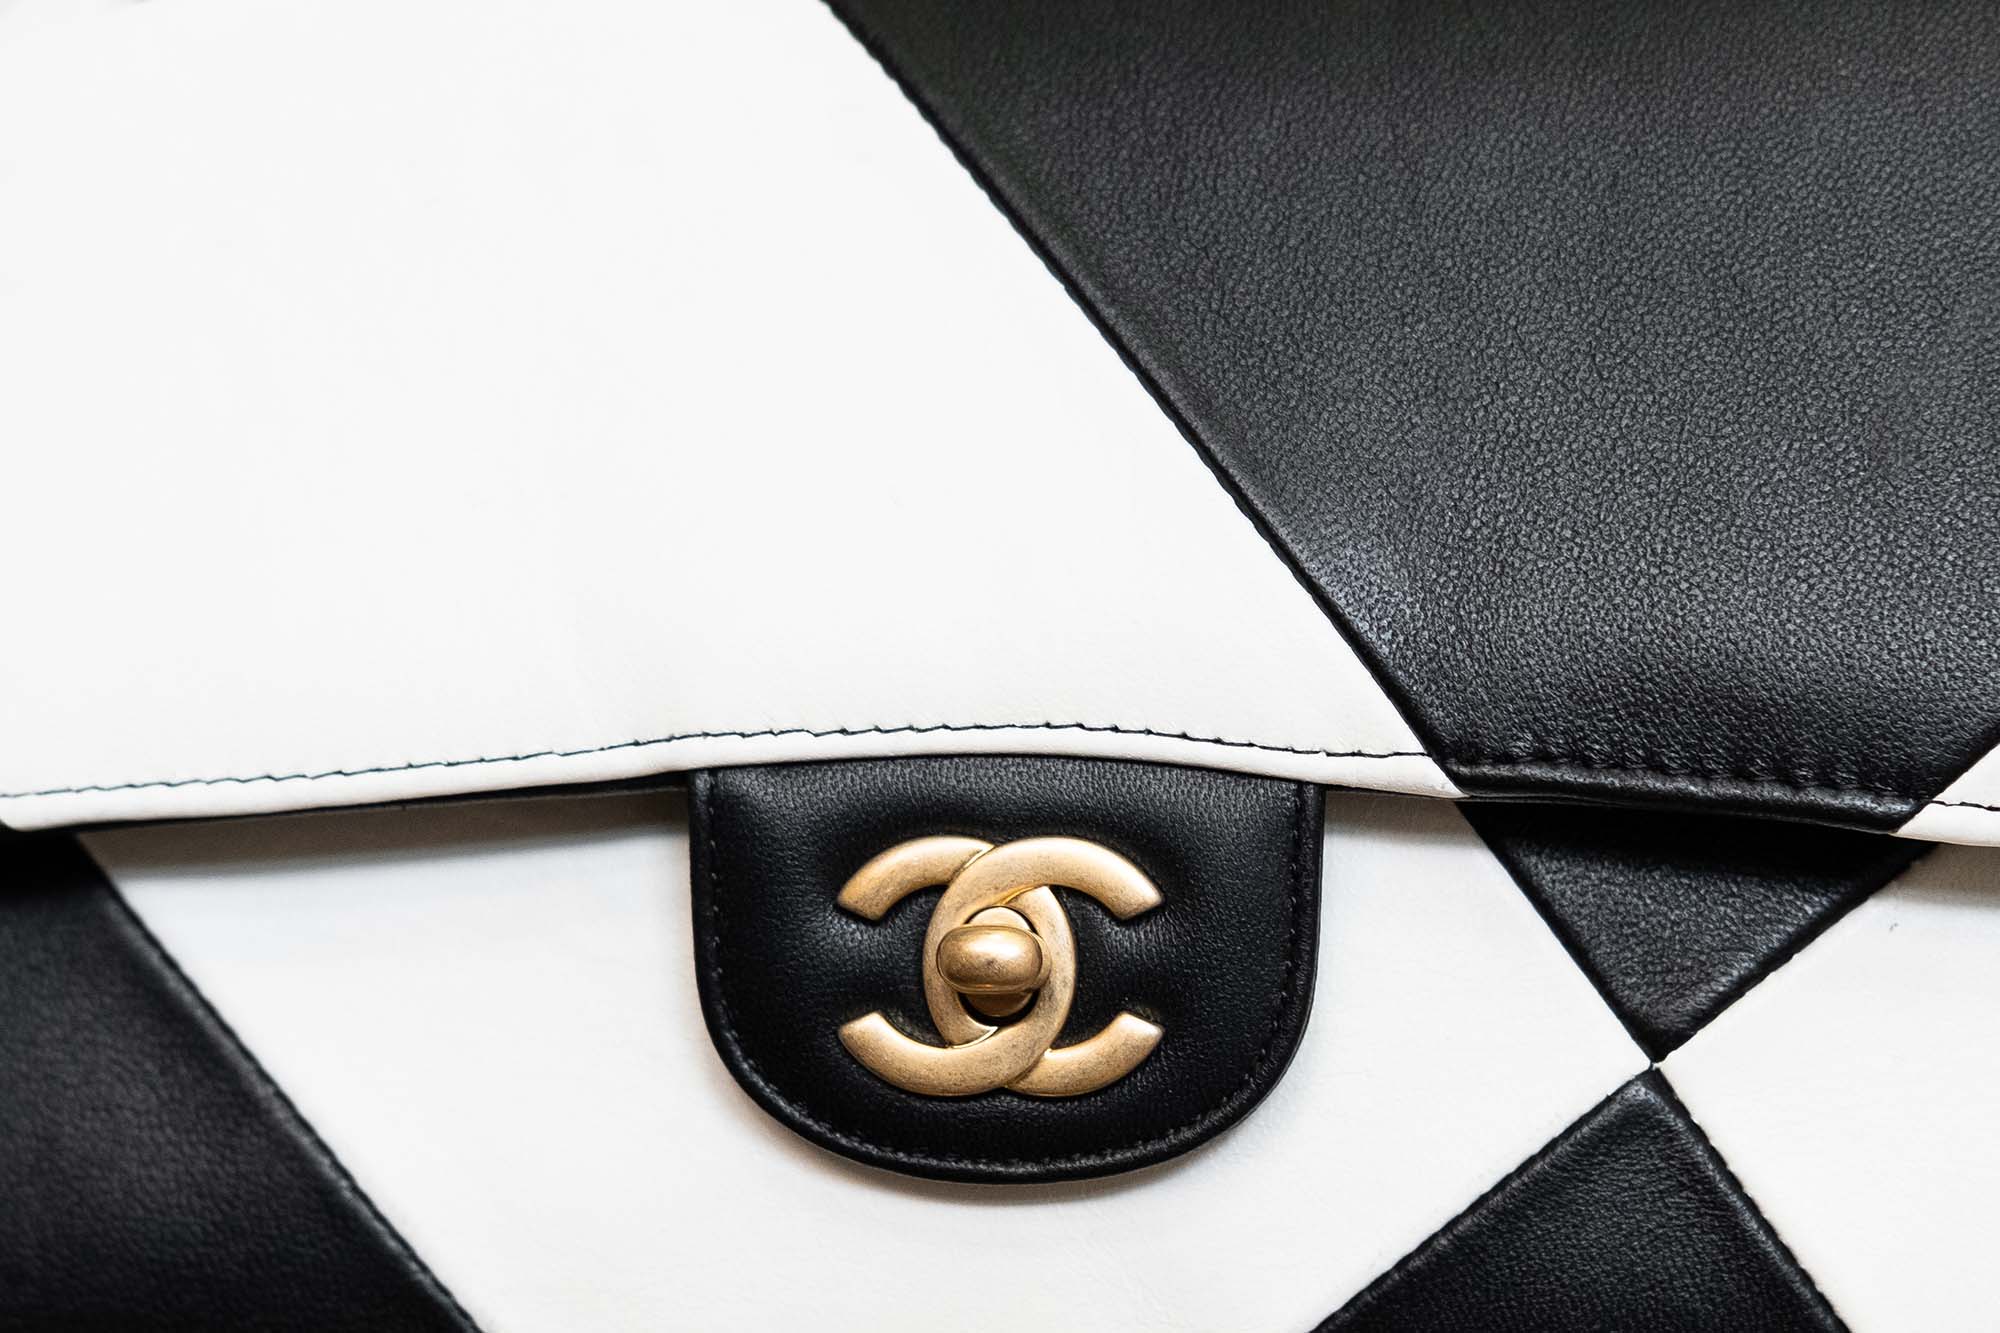 chanel black and white bag 2021